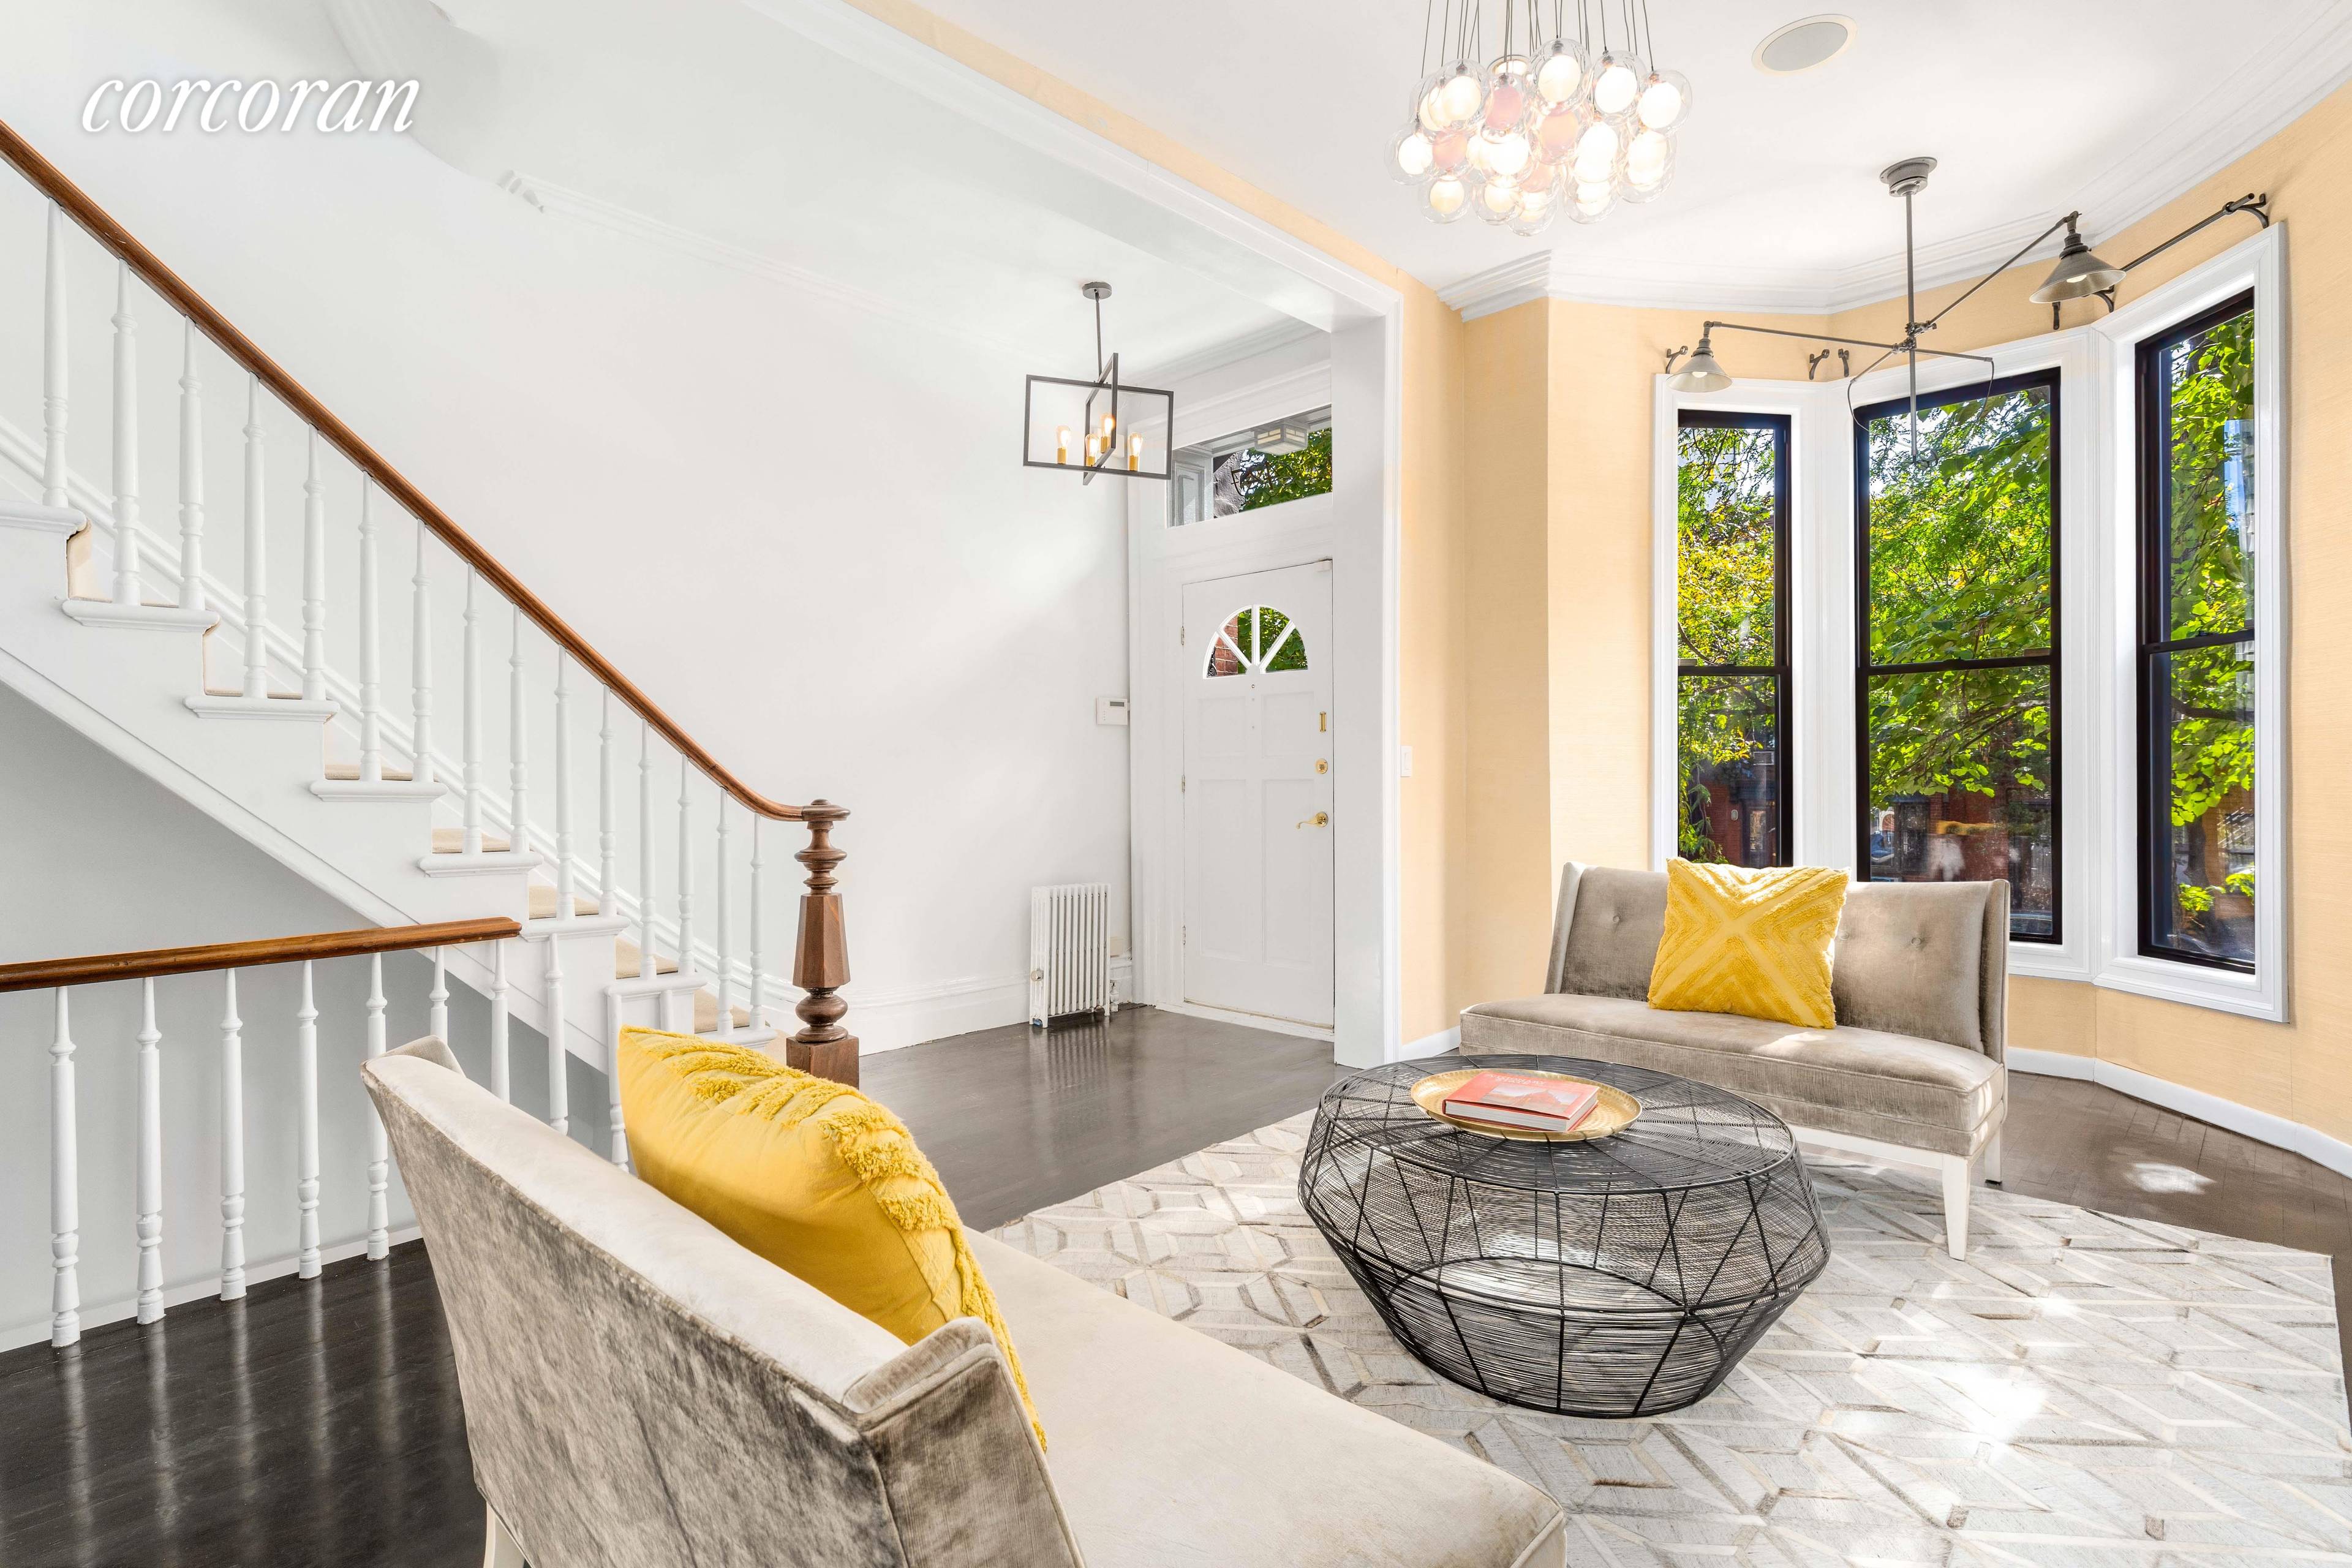 427 10th Street in Park Slope features the rarest of amenities A a double wide 37A garden oasis with blue stone landscaping and tiered planting beds and room for multiple ...